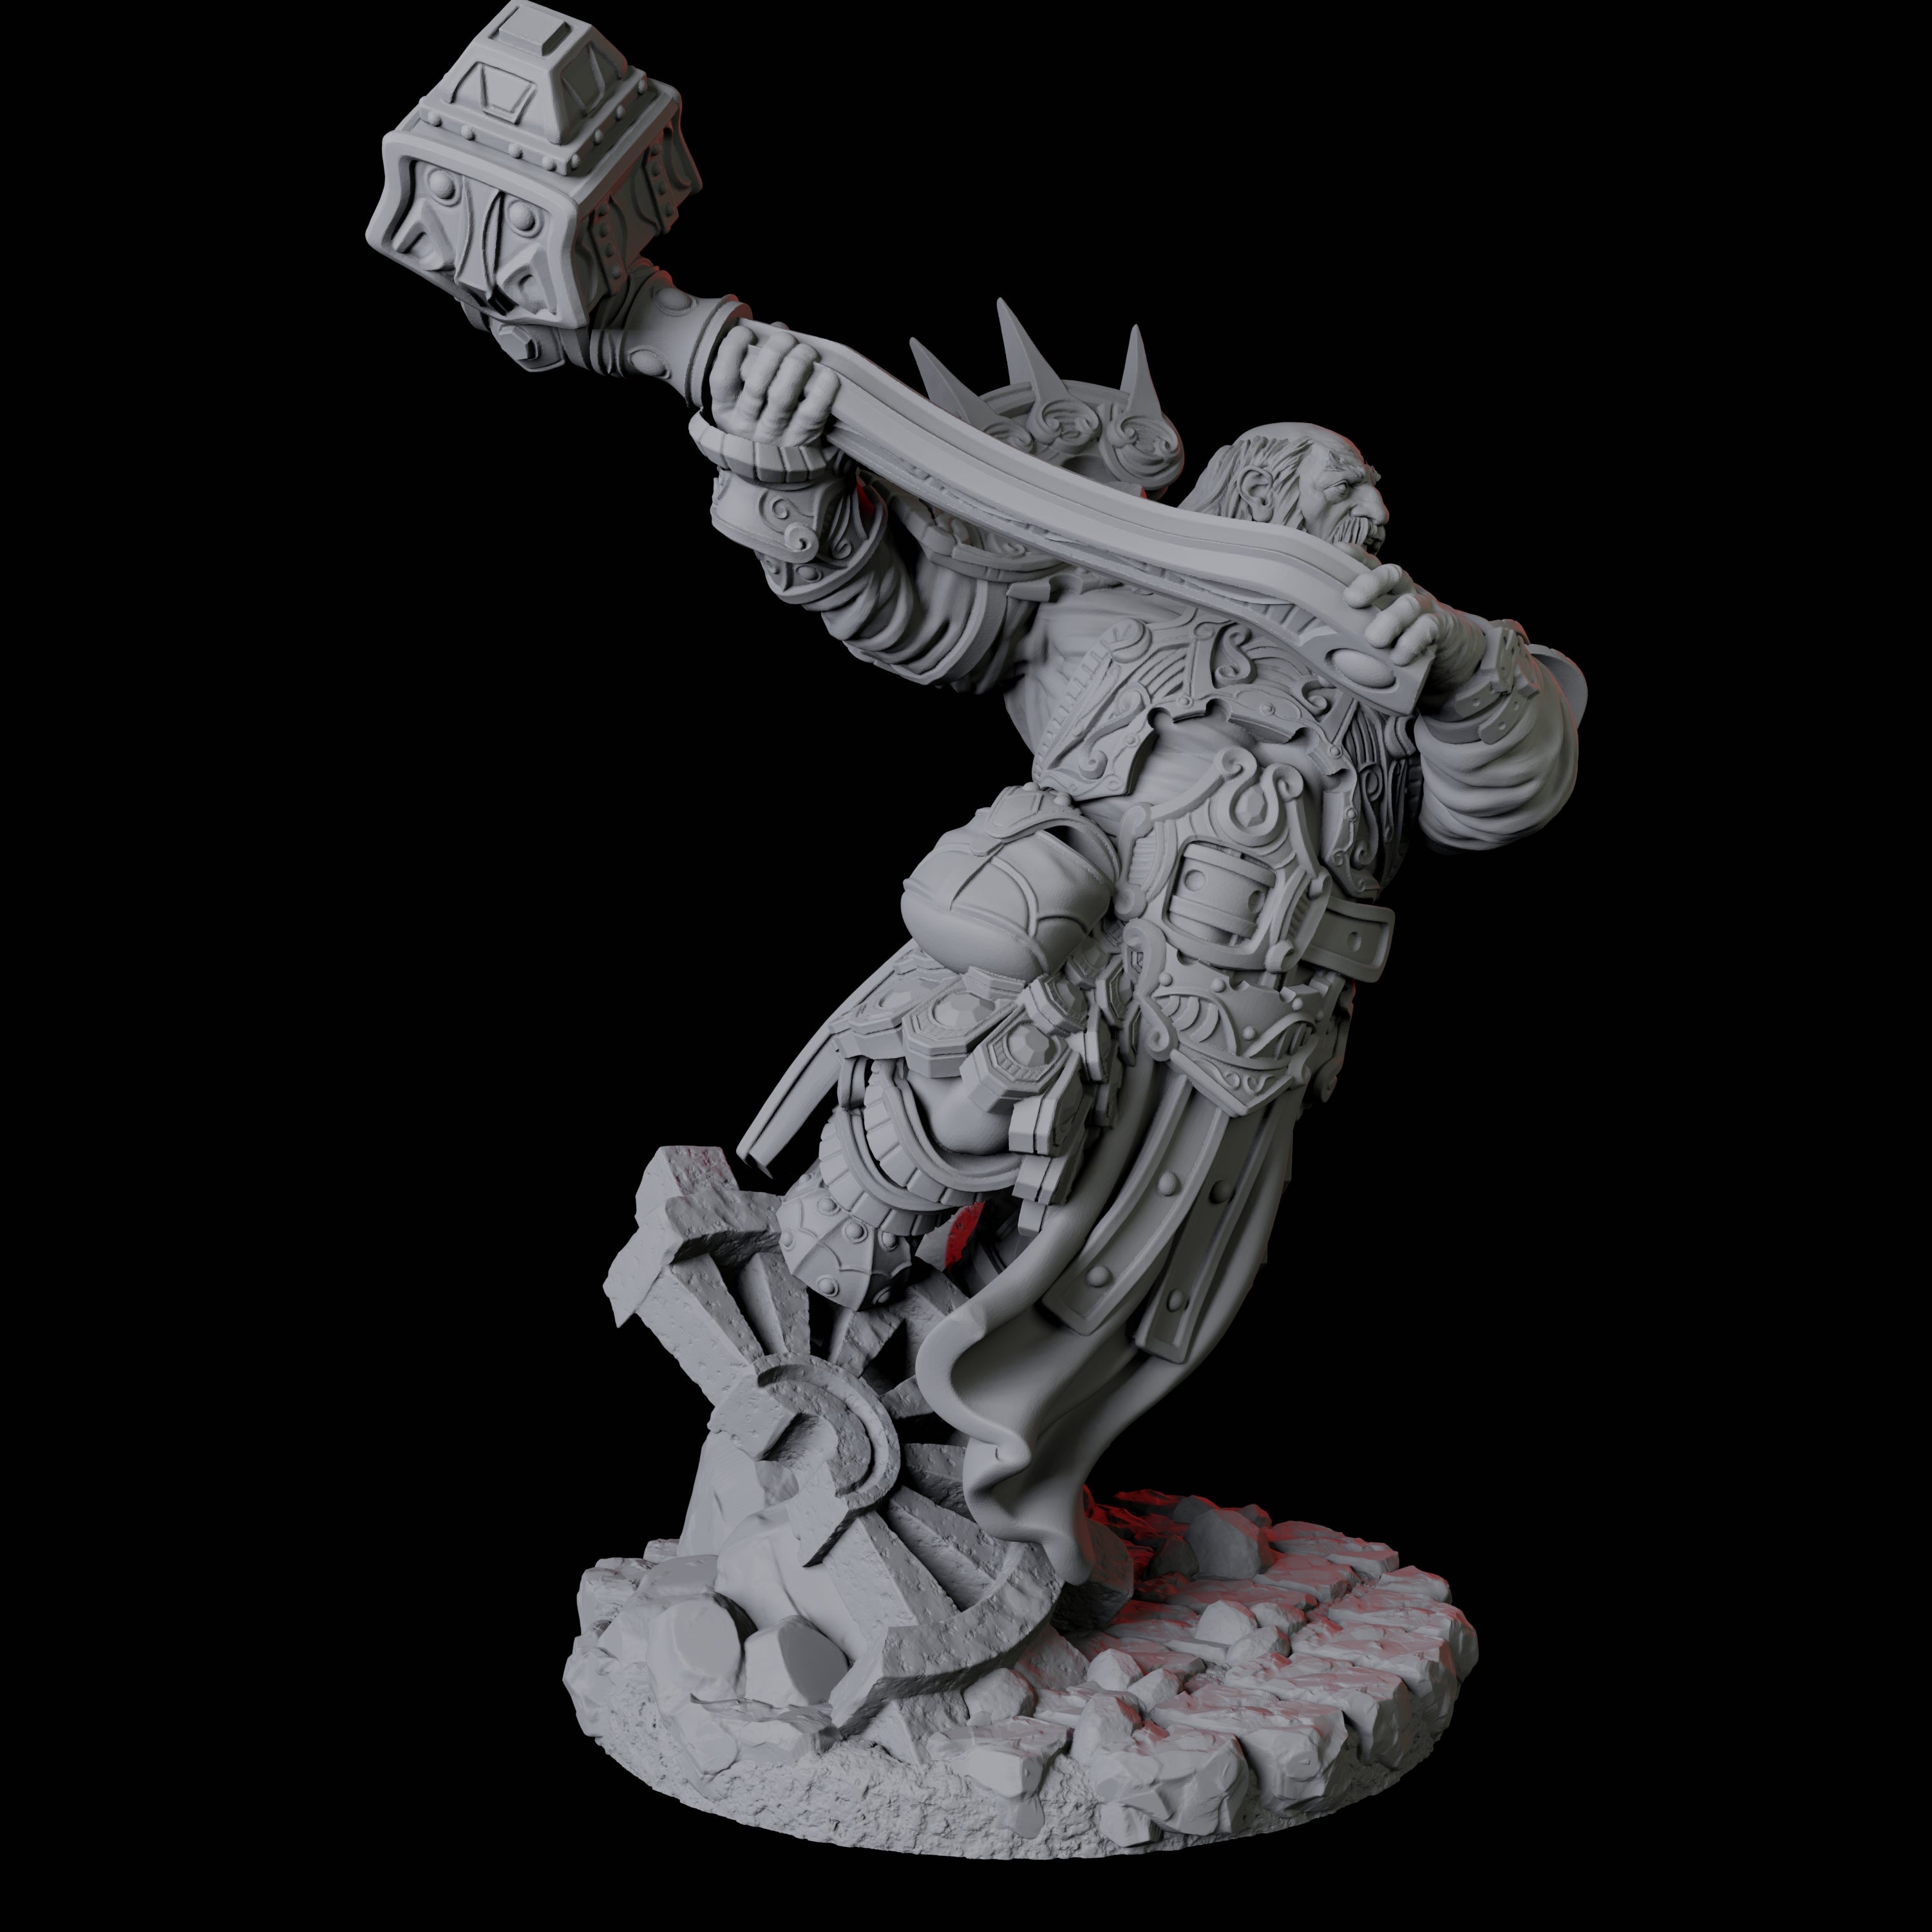 Dwarf Artificer Engineer B Miniature for Dungeons and Dragons, Pathfinder or other TTRPGs